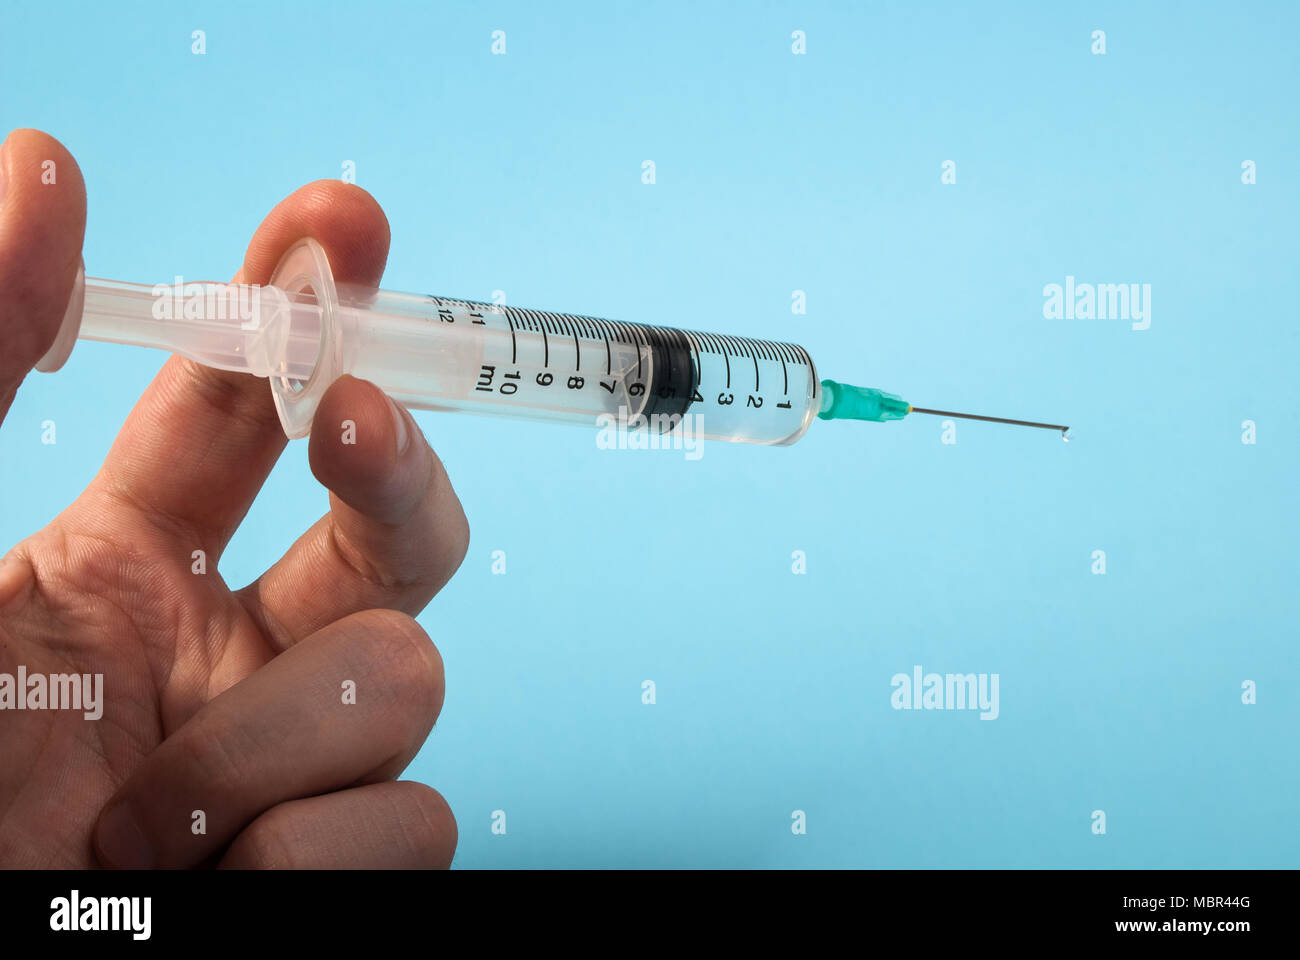 Injection with needle in hand without medical gloves isolated on blue background, medical concept Stock Photo